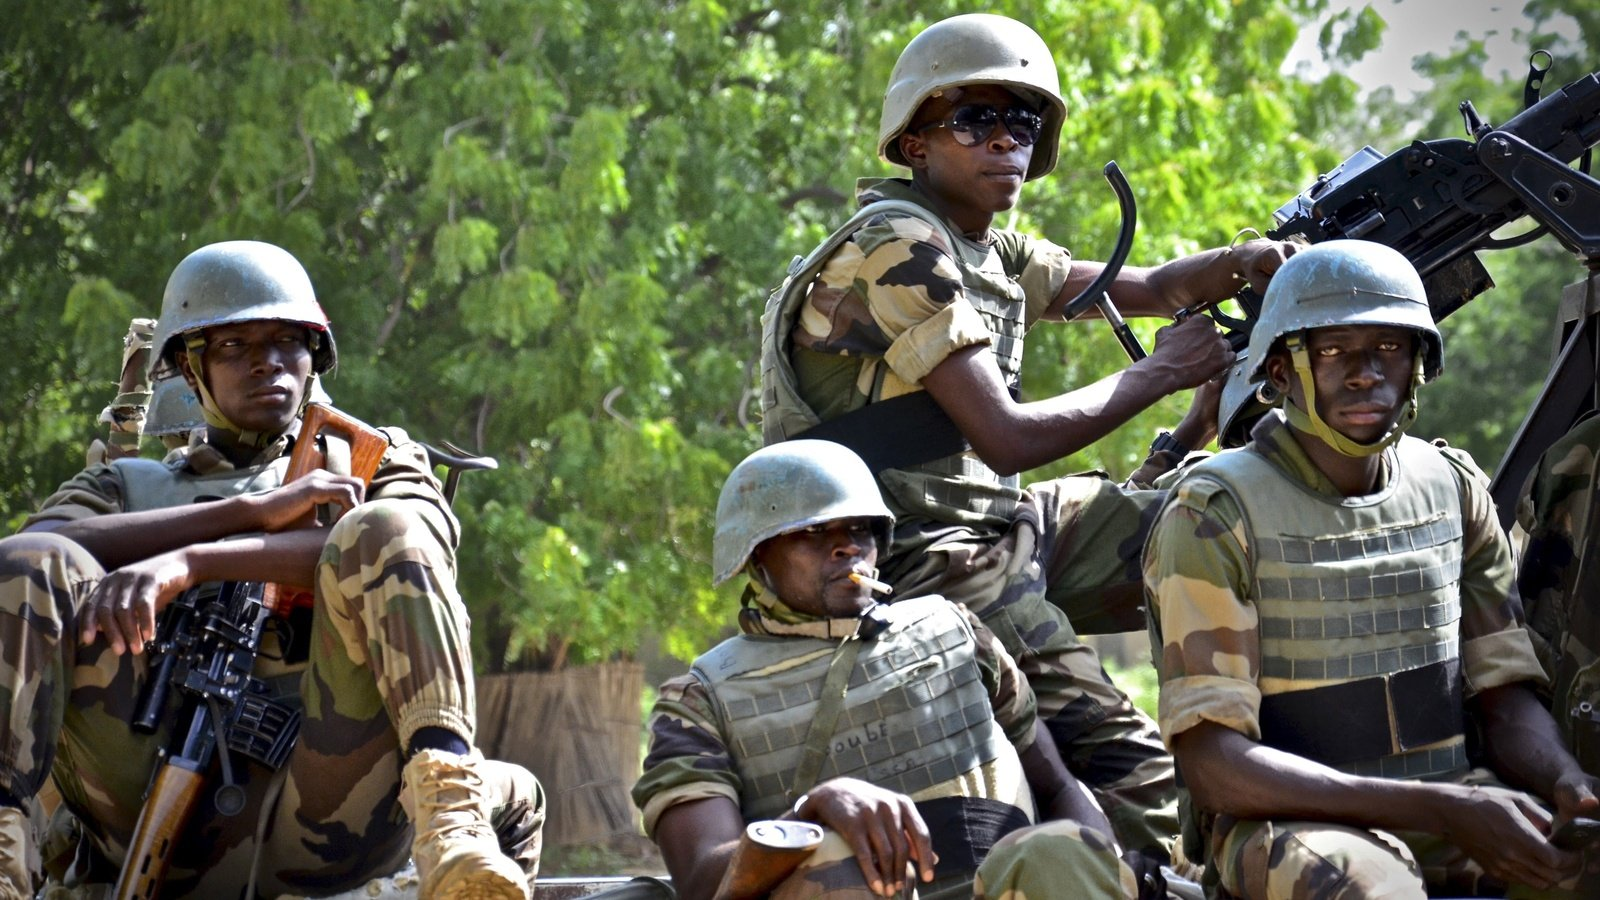 Measuring Boko Haram’s Impact on State Security Services